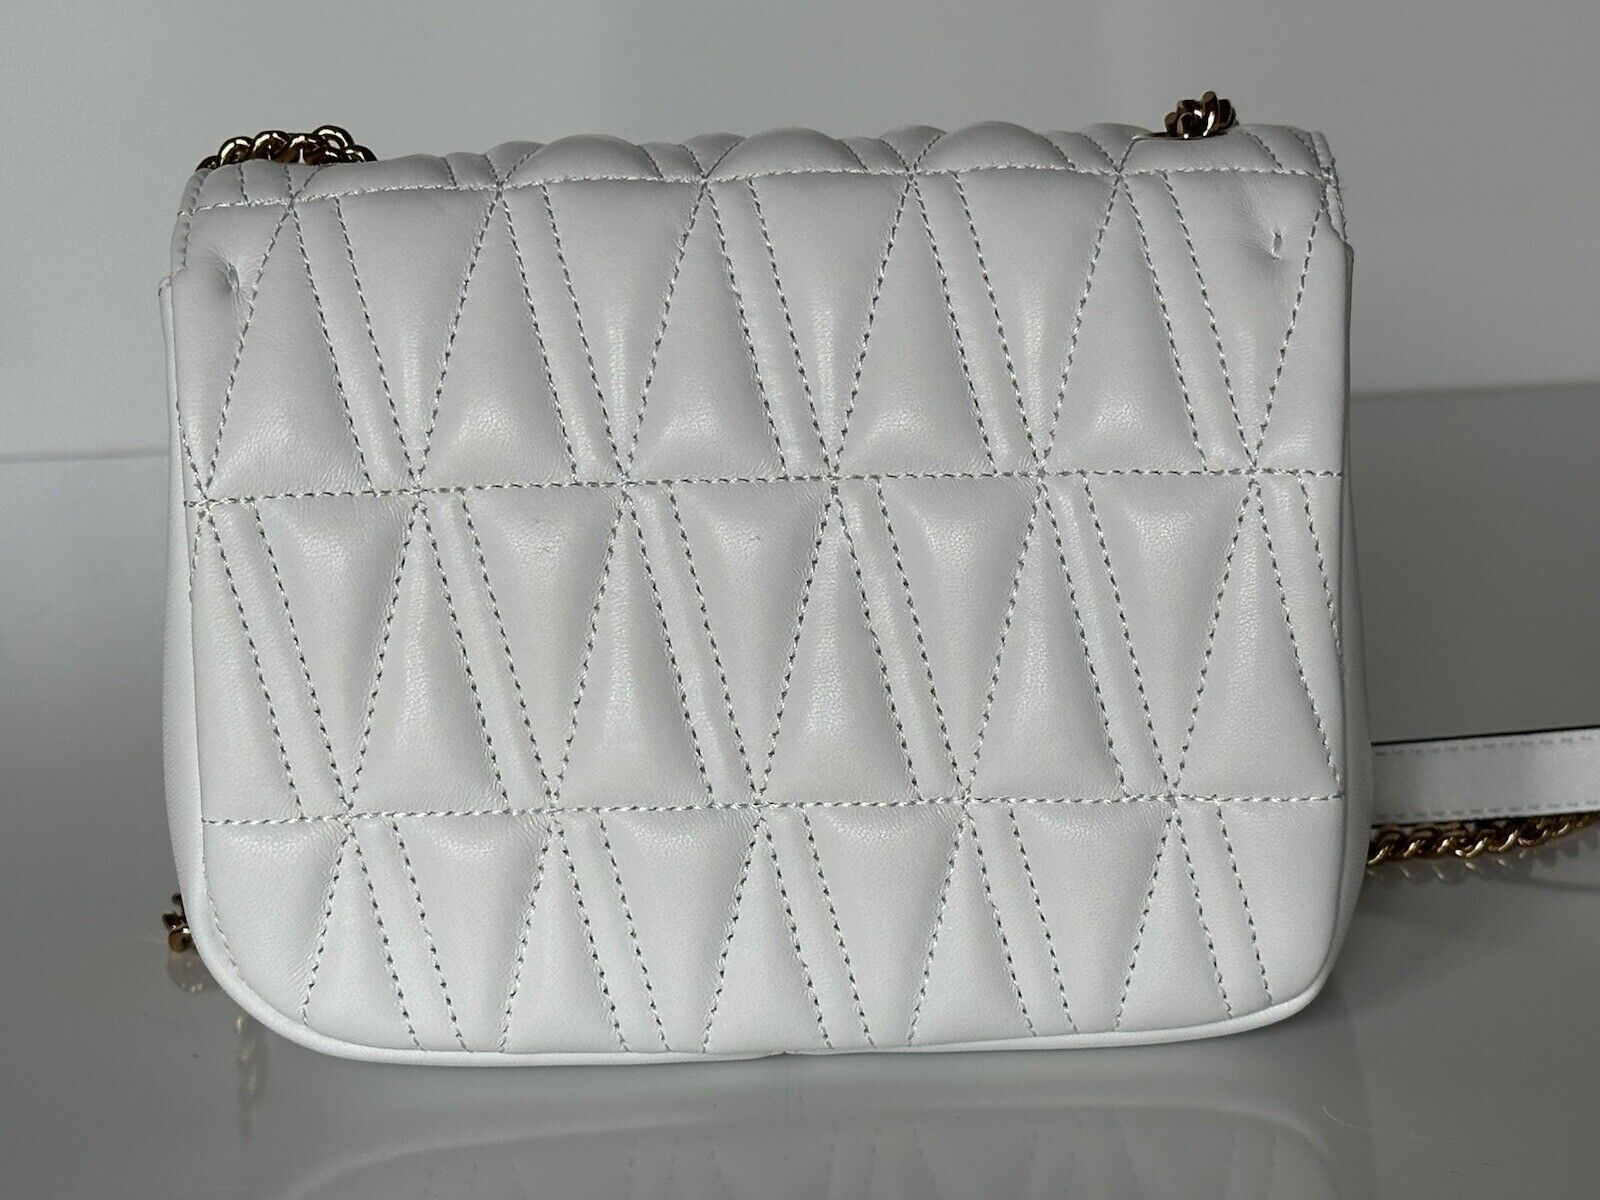 Versace Virtus Quilted Leather White Crossbody Shoulder Bag DBFH821 IT NWT $1925